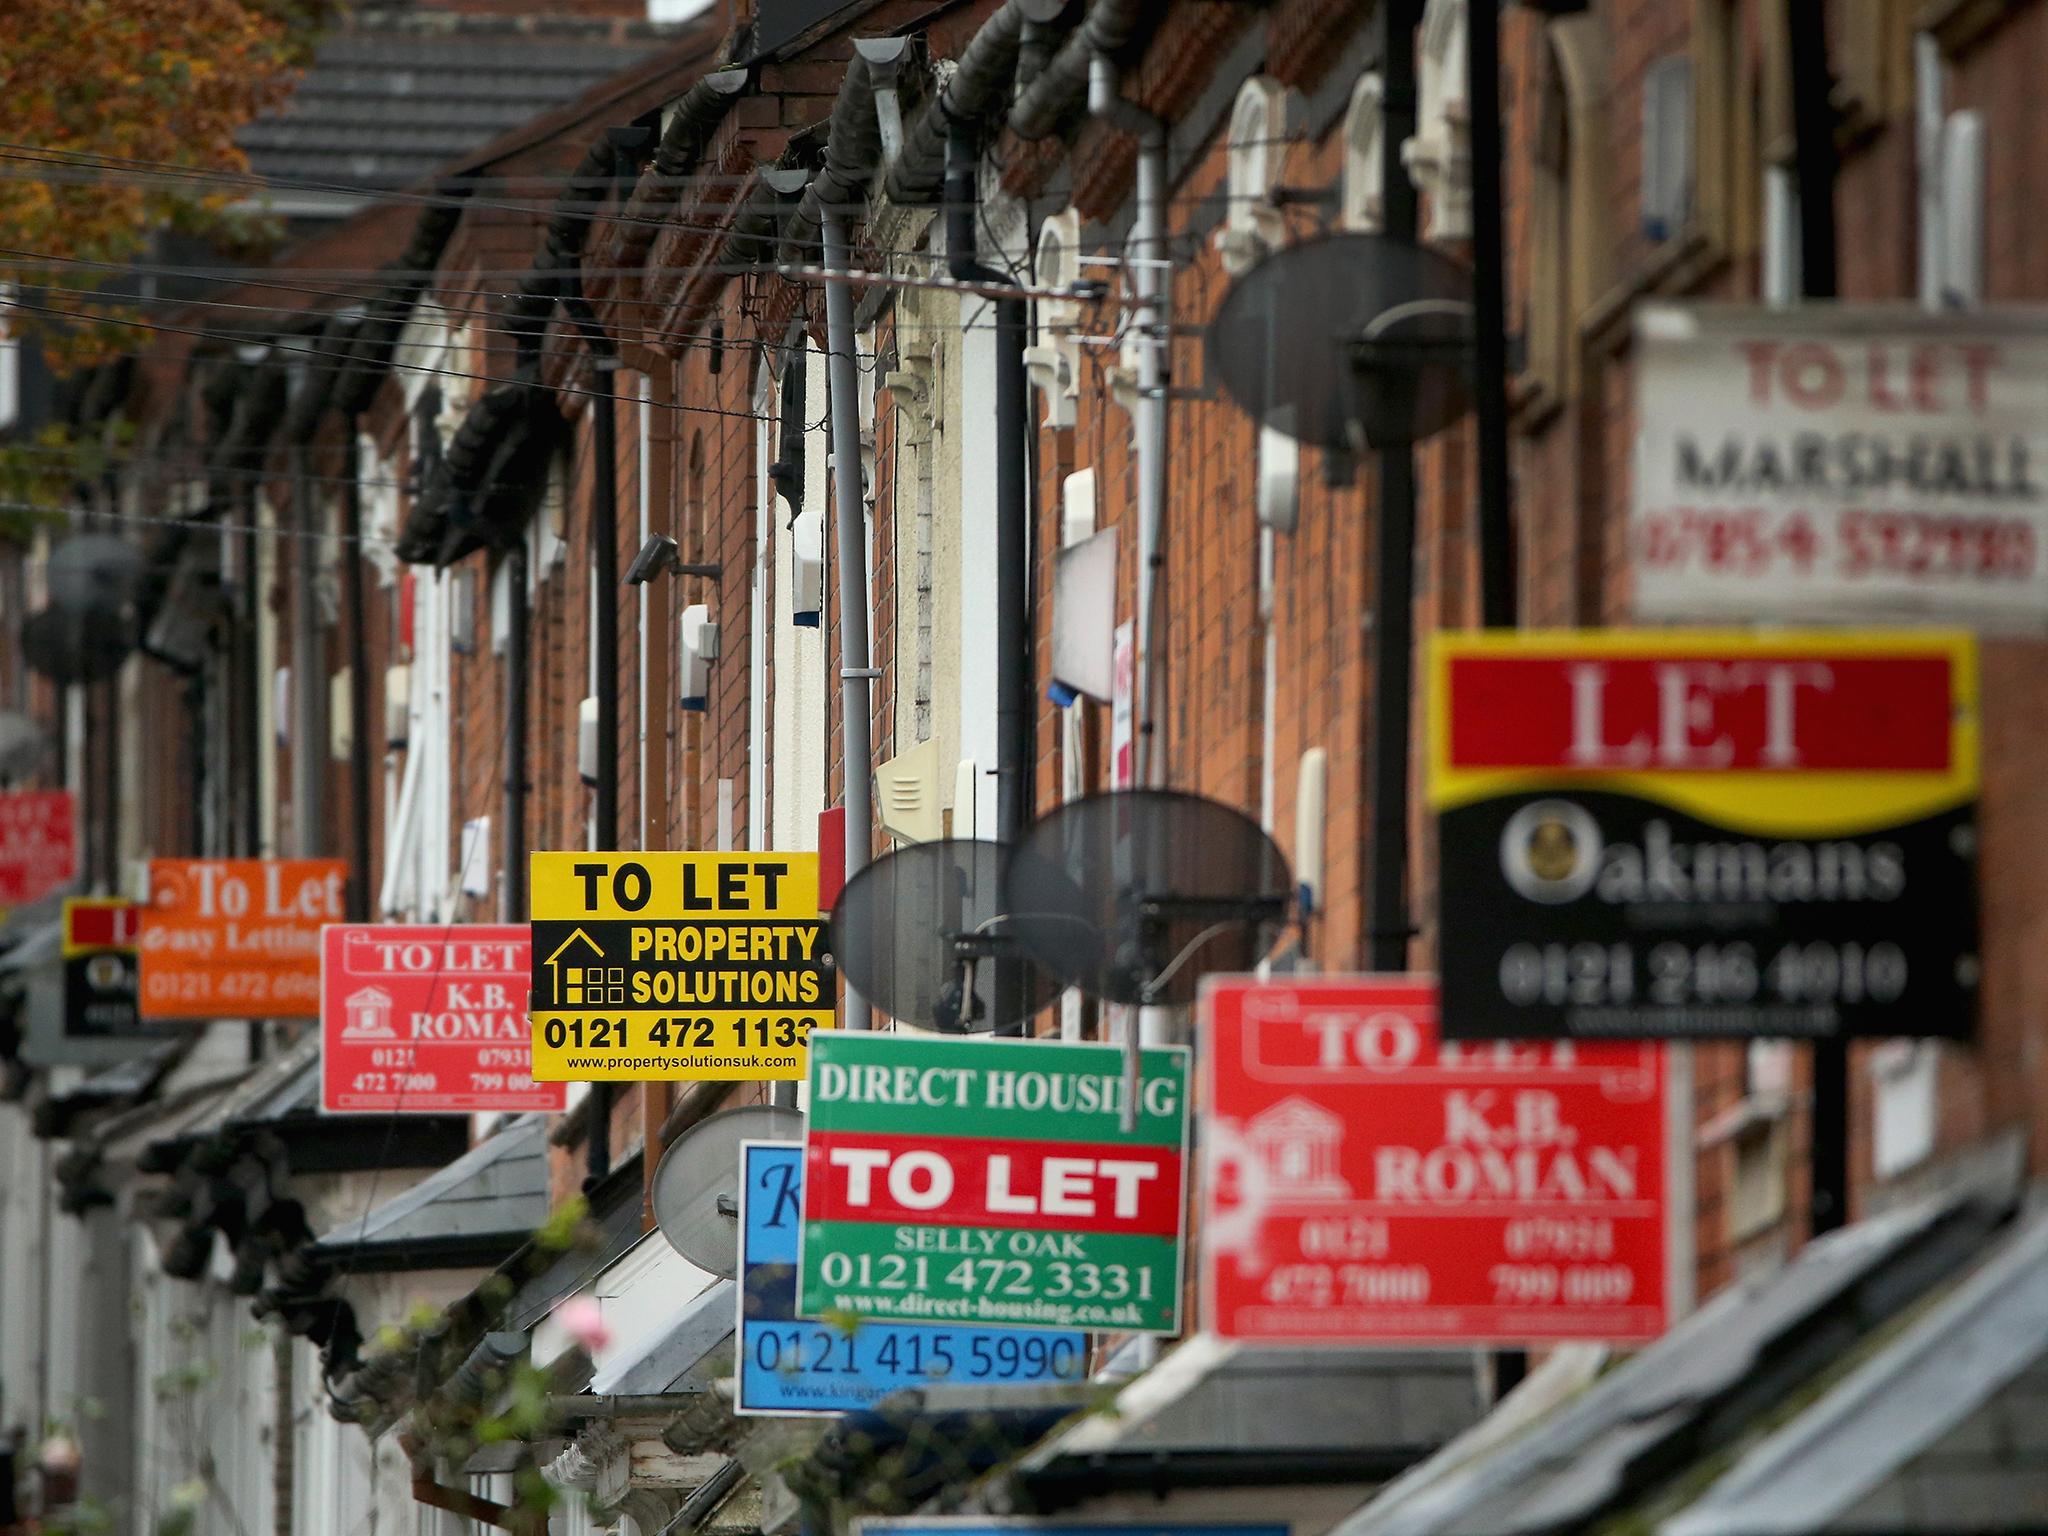 Many property investors will have been deeply unnerved by the Brexit vote